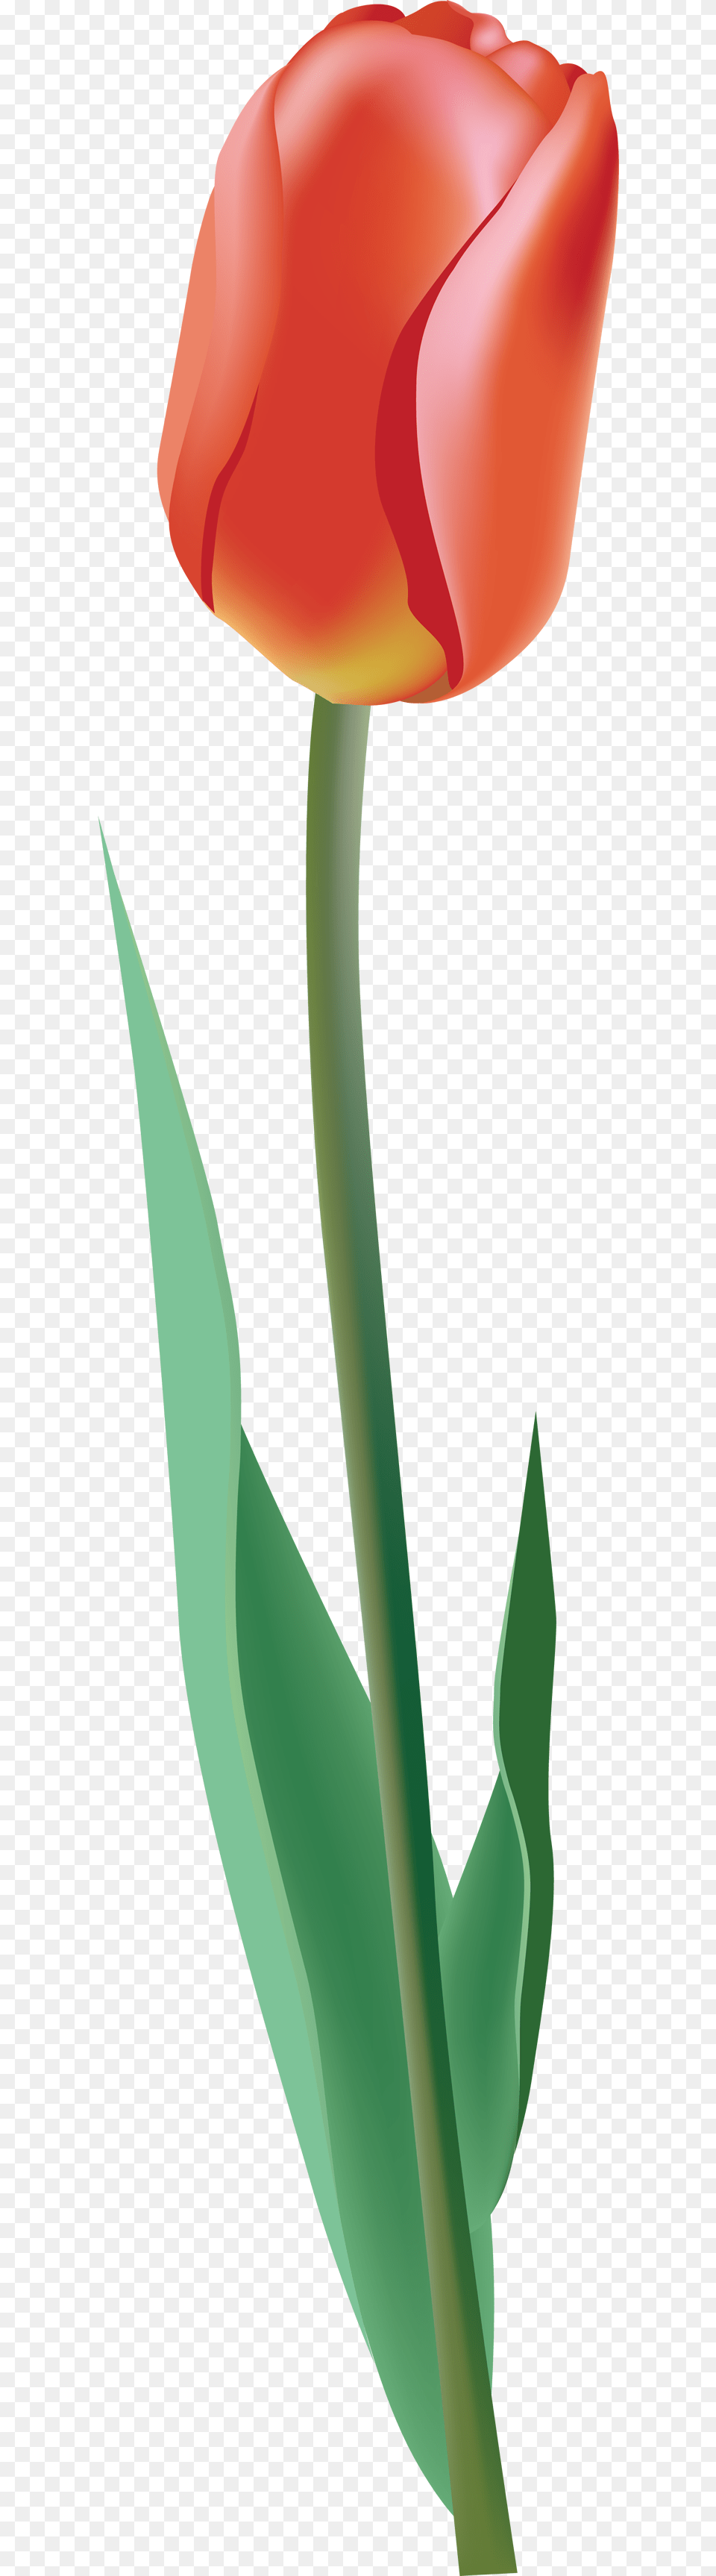 One Tulip, Flower, Plant, Rose Png